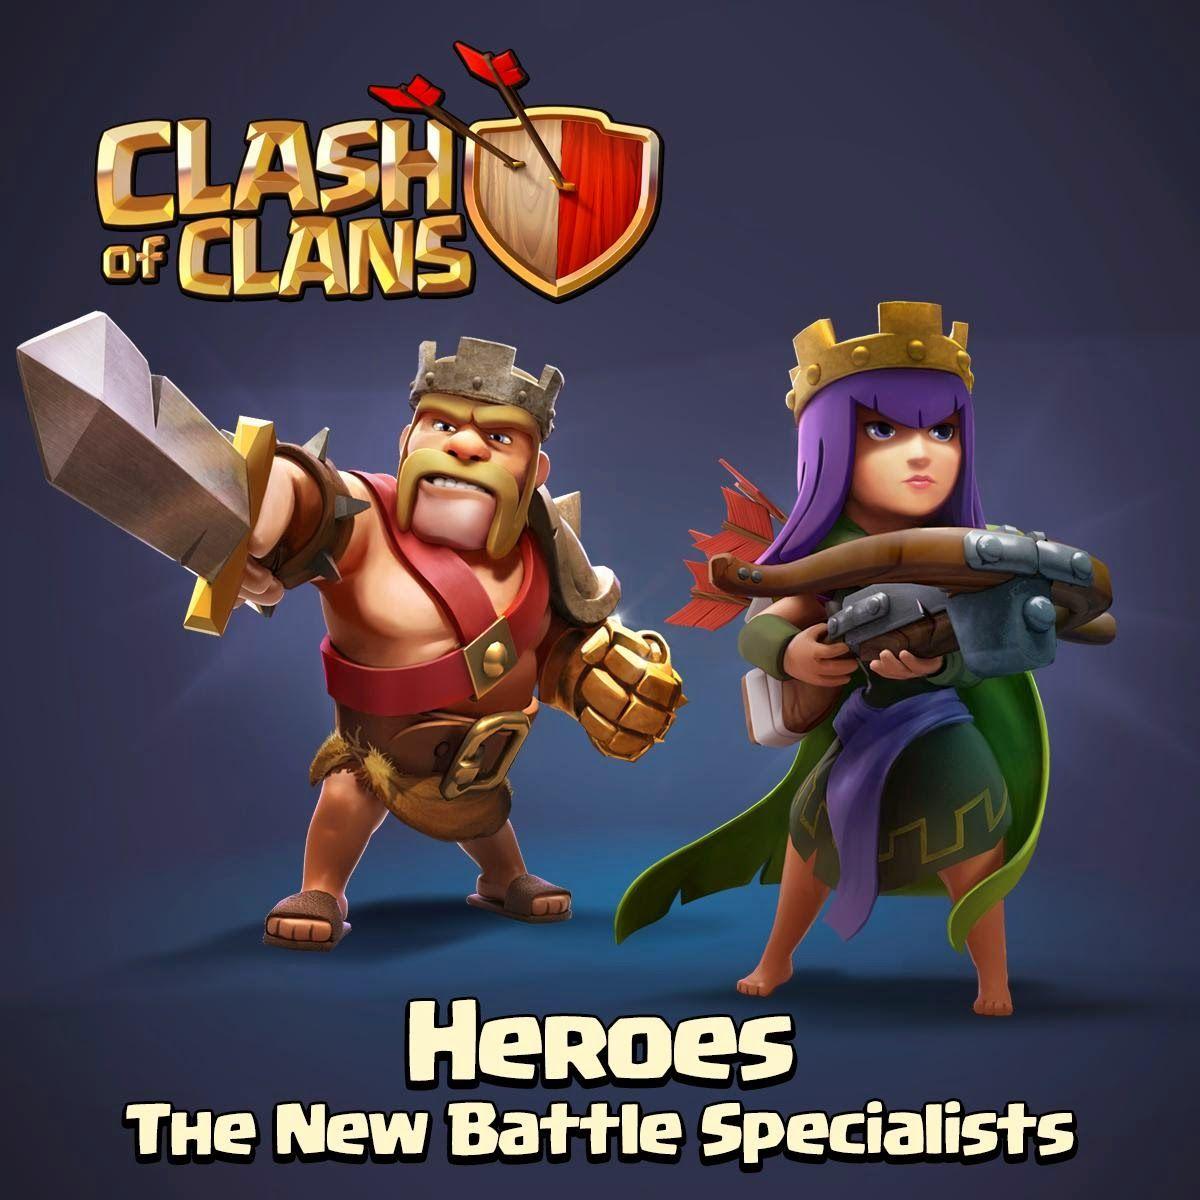 Barbarian King And Archer Queen Of Clans Heroes HD Wallpaper Page. Clash of clans, Archer queen, Barbarian king